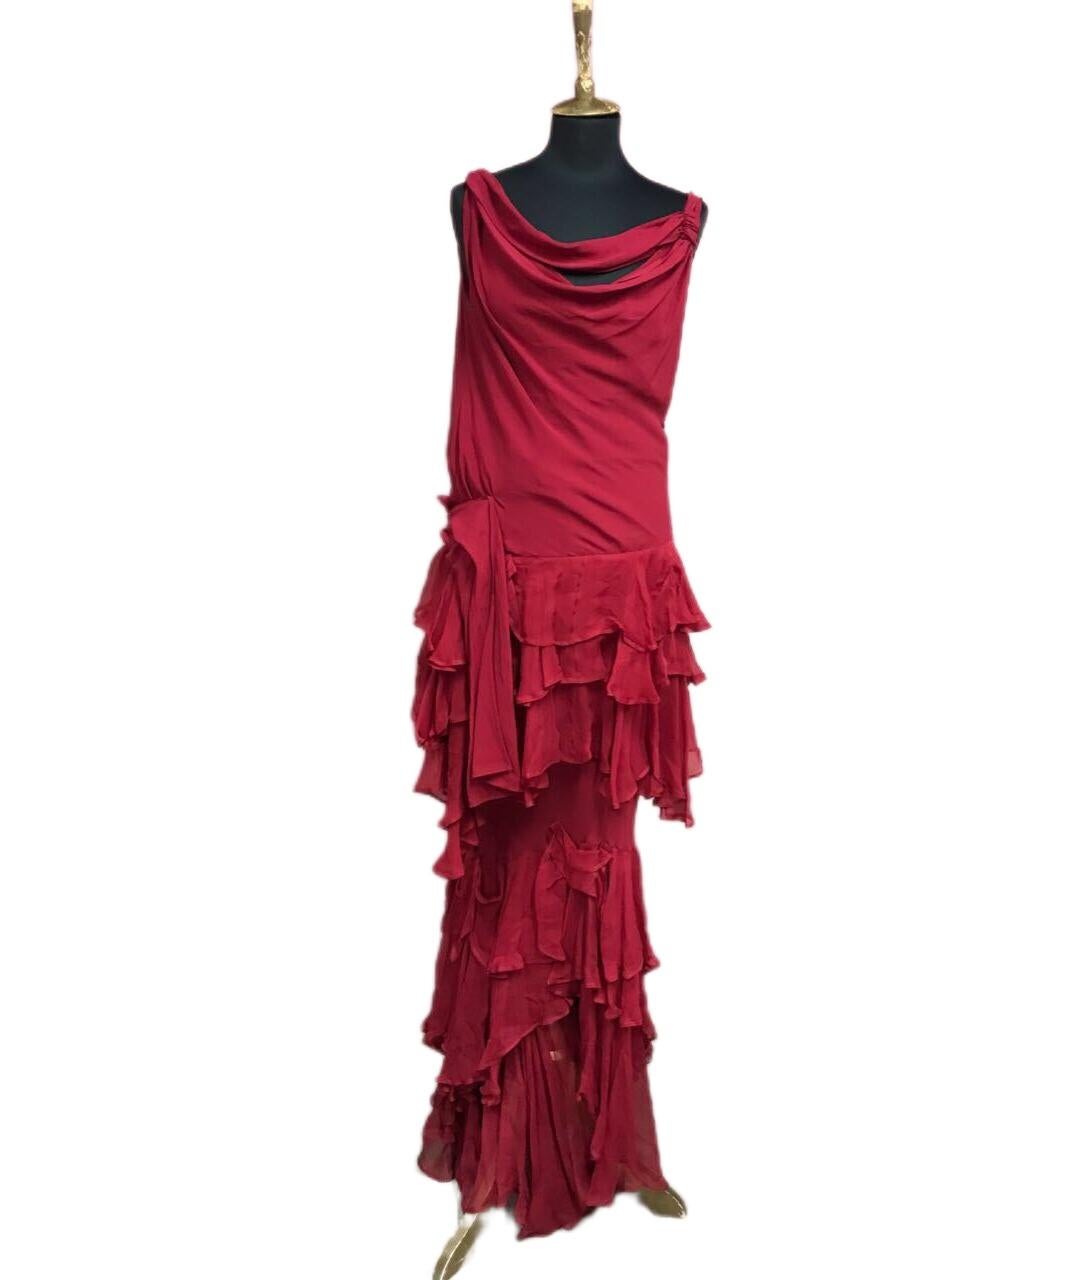 Christian Dior Long Red Dress
Fabulous ruffled design
100% Silk
Size: EU - 46, FR - 42, USA - 10
Made in France
Excellent condition
